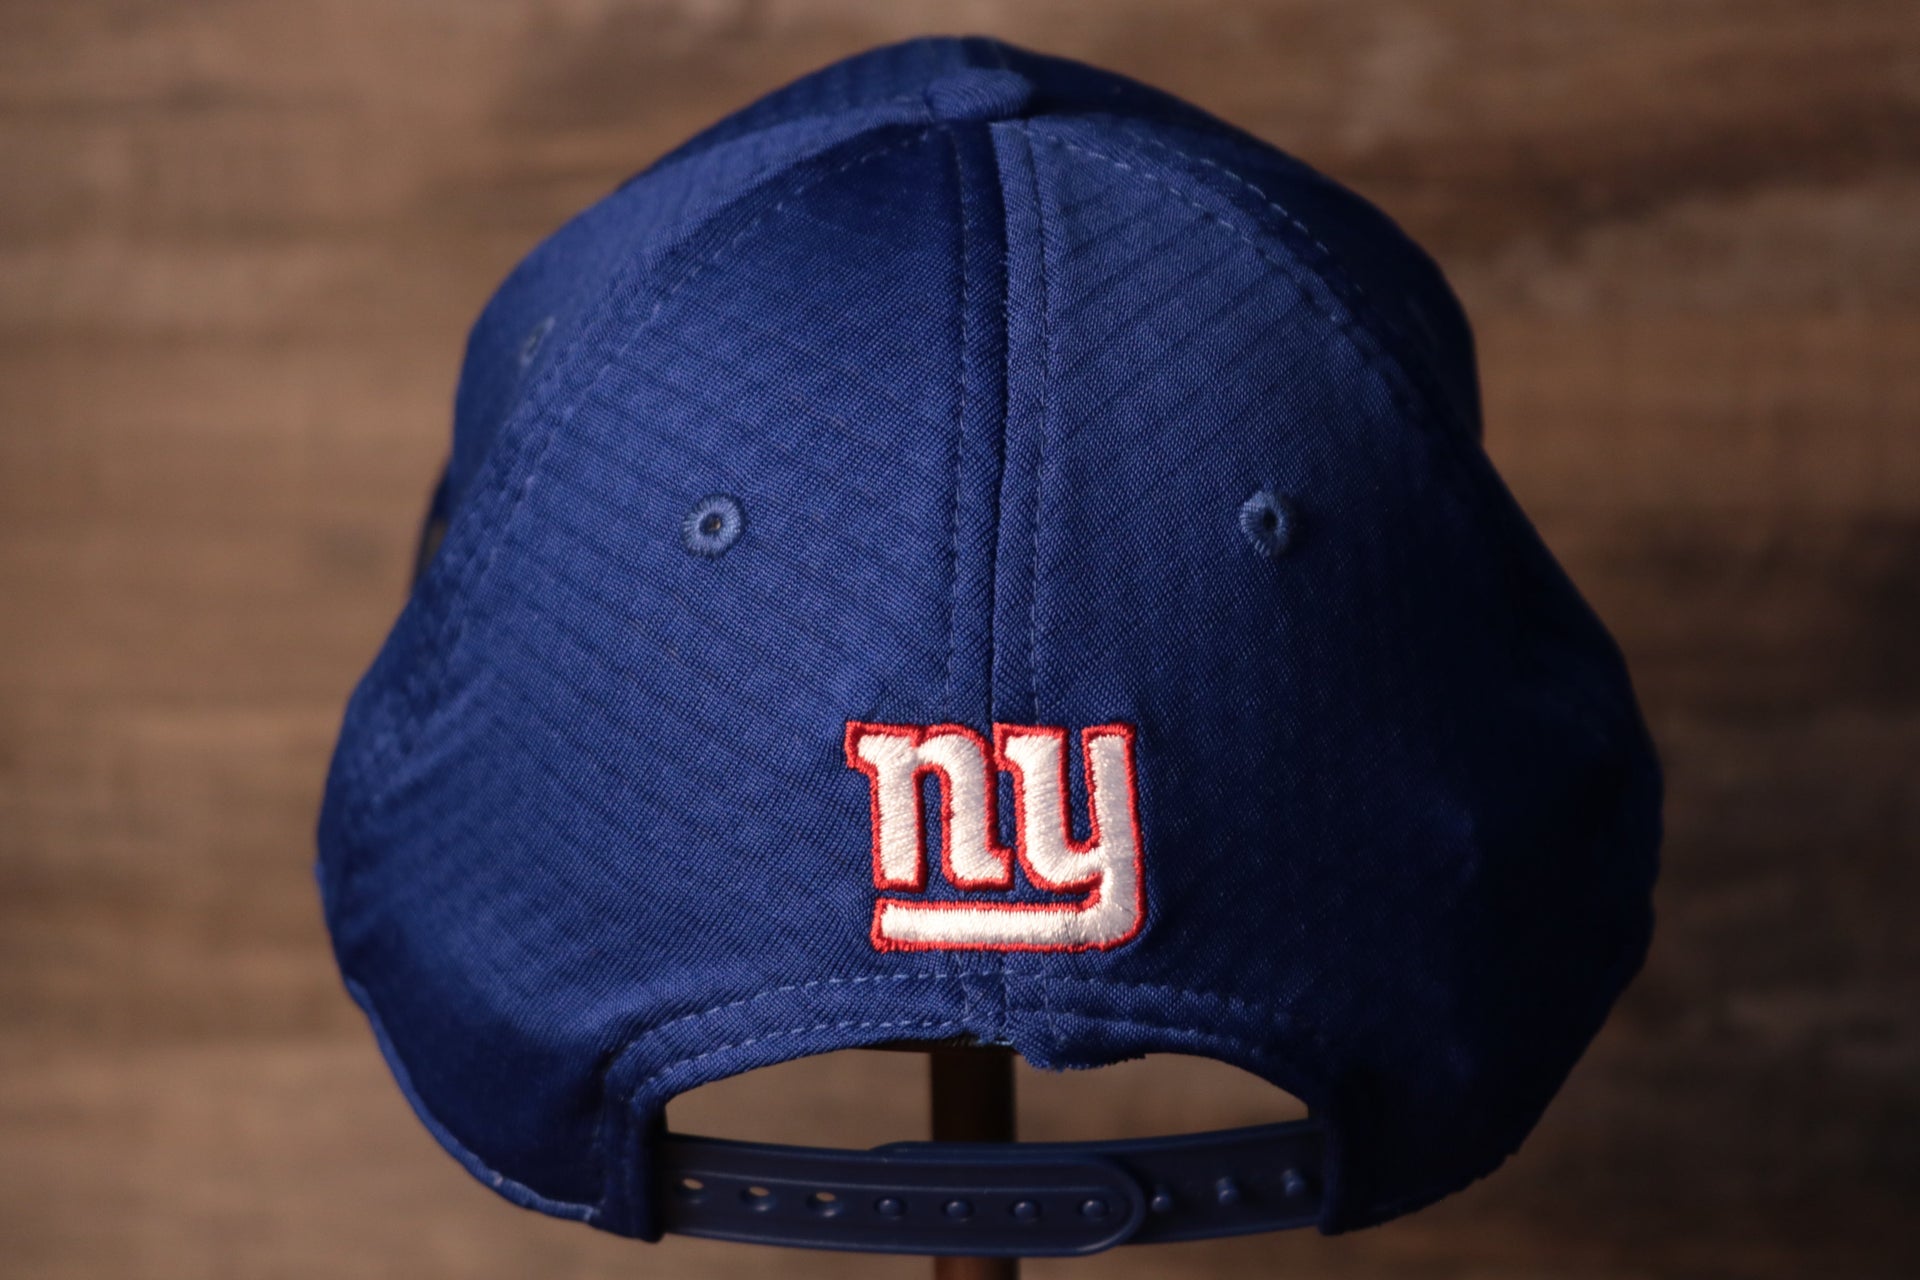 the giants logo is on the back Giants 2020 Training Camp Snapback Hat | New York Giants 2020 On-Field Red Training Camp Snap Cap